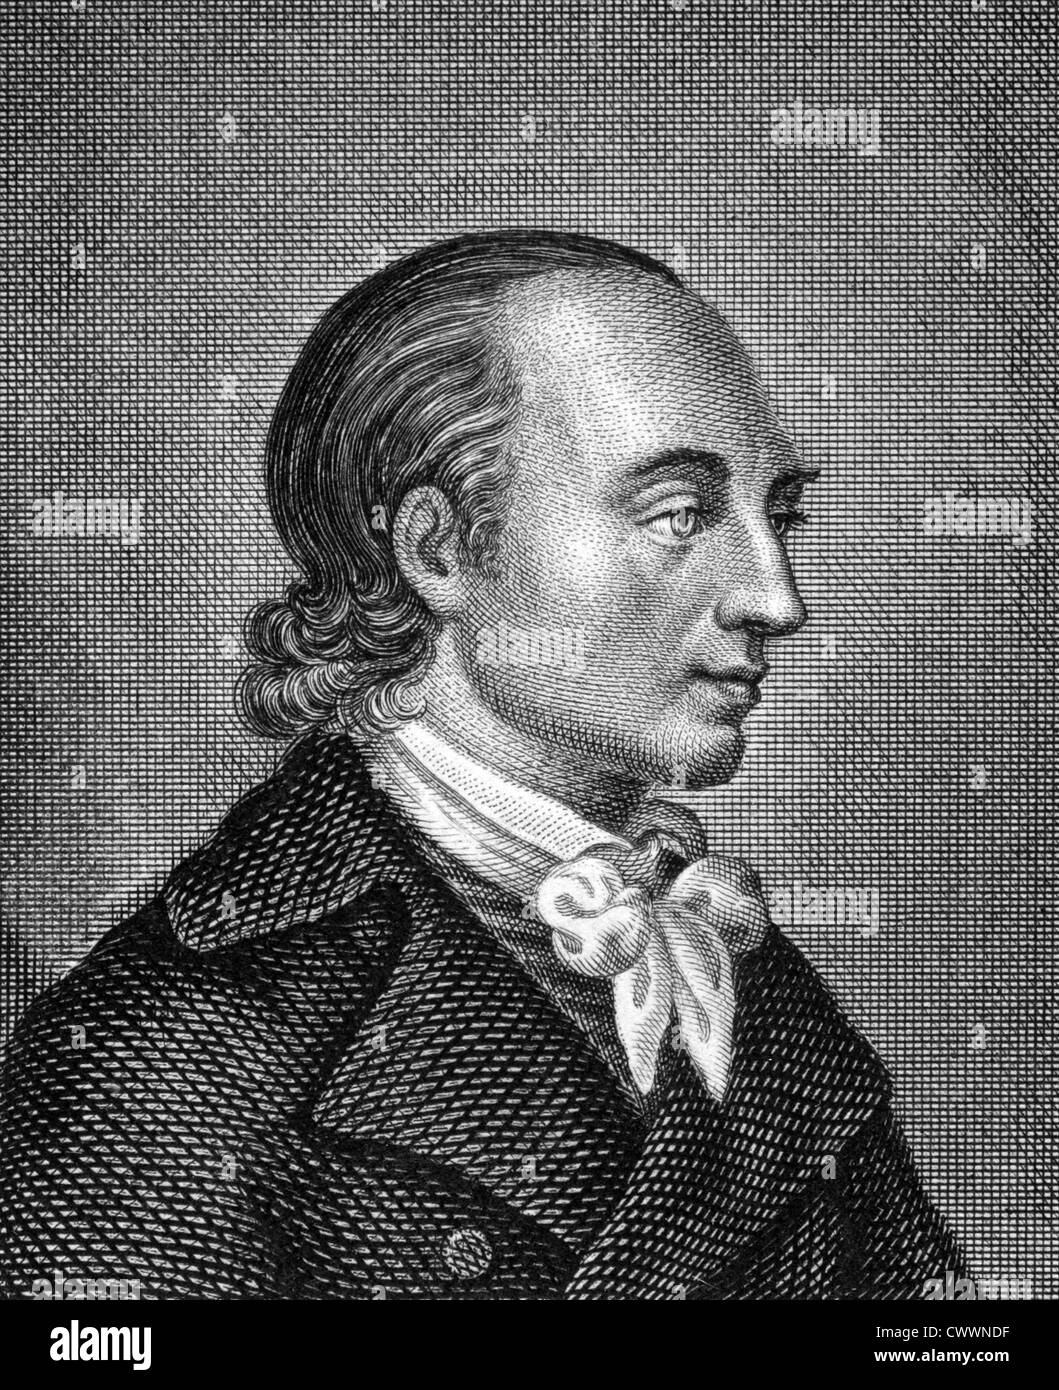 Johann Heinrich Voss (1751-1826) on engraving from 1859. German poet translator of the Iliad and Odyssey of Homer. Stock Photo